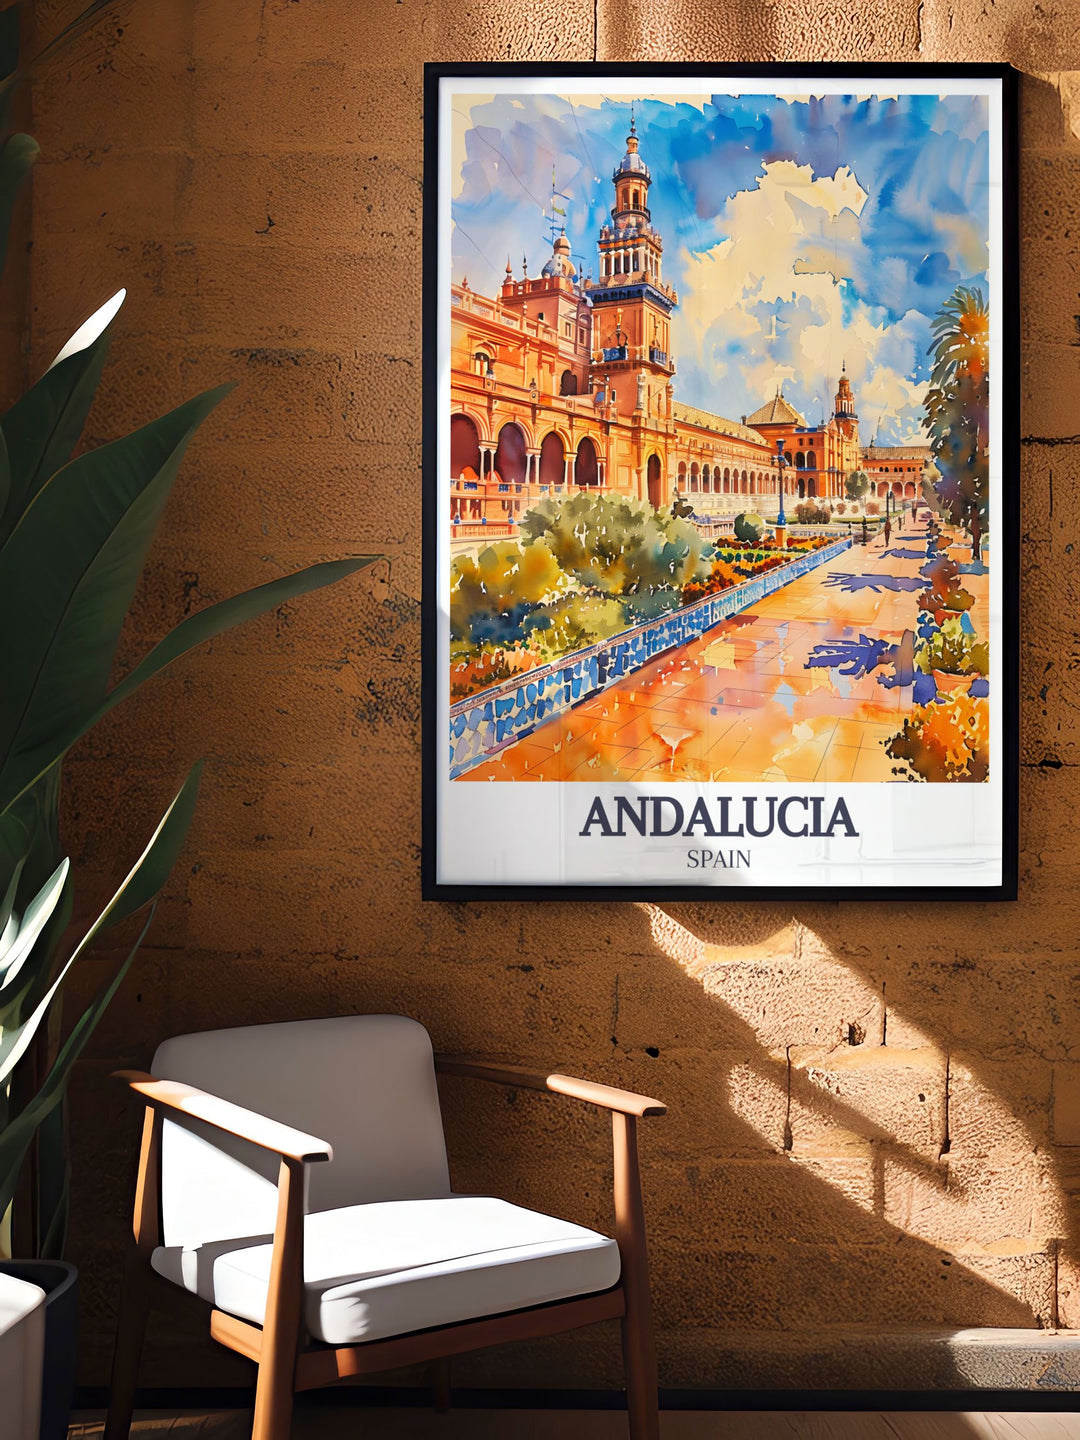 This Alcazar of Seville travel poster brings the majestic beauty of the Ambassadors Hall into your home, with detailed illustrations of its ornate ceilings and traditional Andalusian tiles, ideal for any decor.